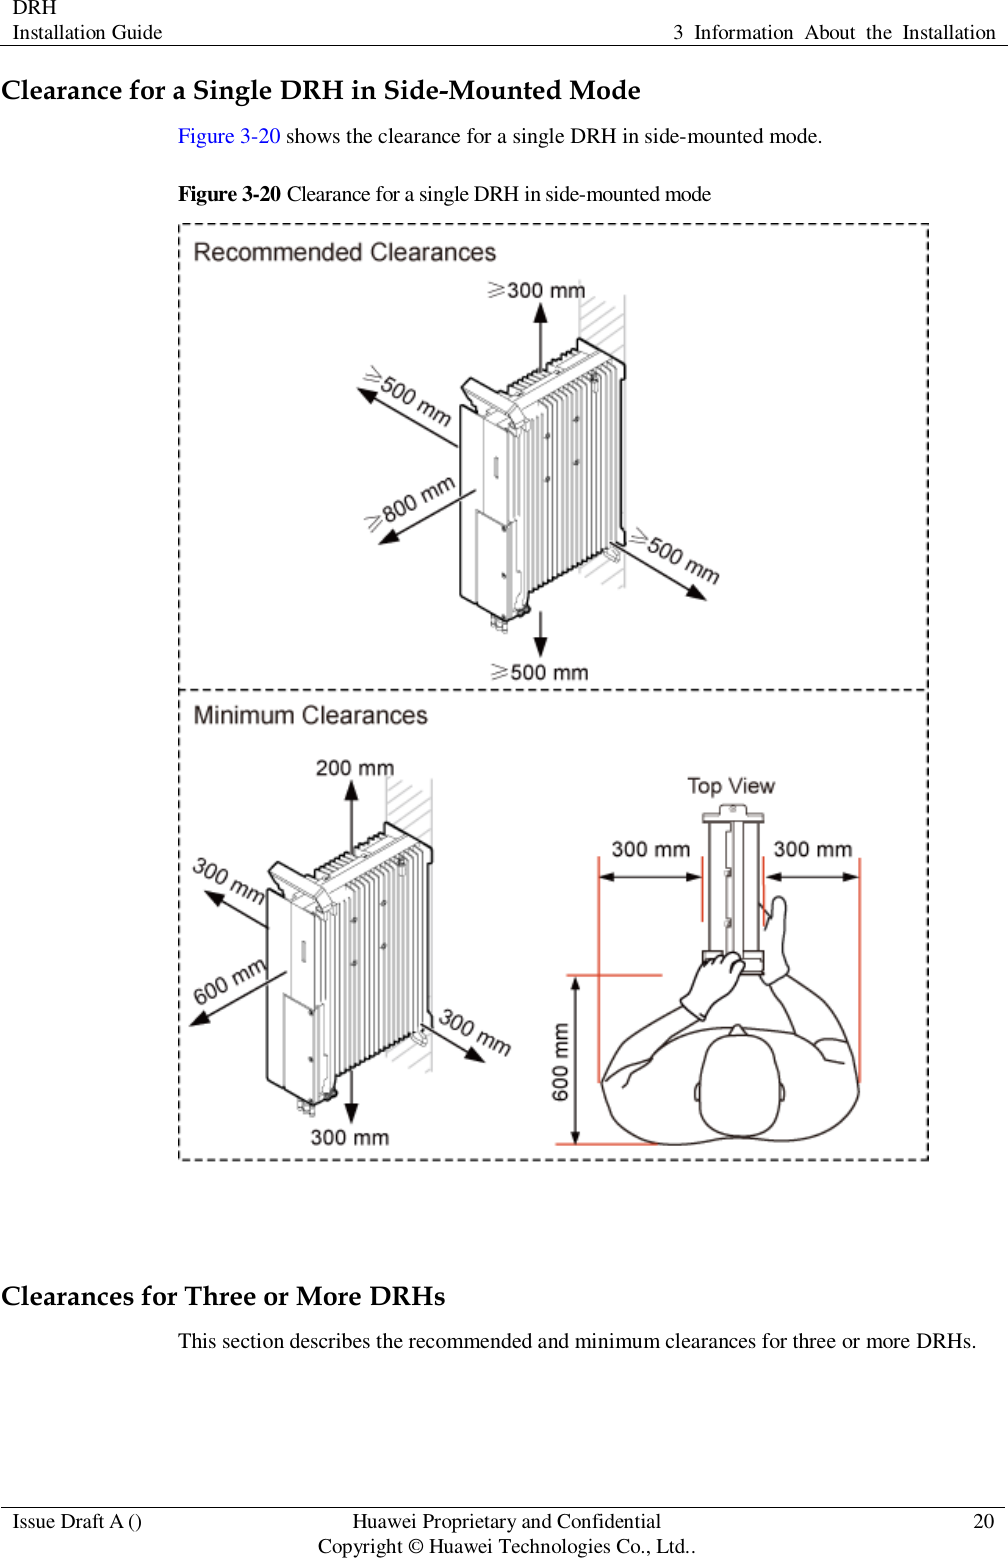 DRH   Installation Guide 3  Information  About  the  Installation  Issue Draft A () Huawei Proprietary and Confidential                                     Copyright © Huawei Technologies Co., Ltd.. 20  Clearance for a Single DRH in Side-Mounted Mode Figure 3-20 shows the clearance for a single DRH in side-mounted mode. Figure 3-20 Clearance for a single DRH in side-mounted mode   Clearances for Three or More DRHs This section describes the recommended and minimum clearances for three or more DRHs. 